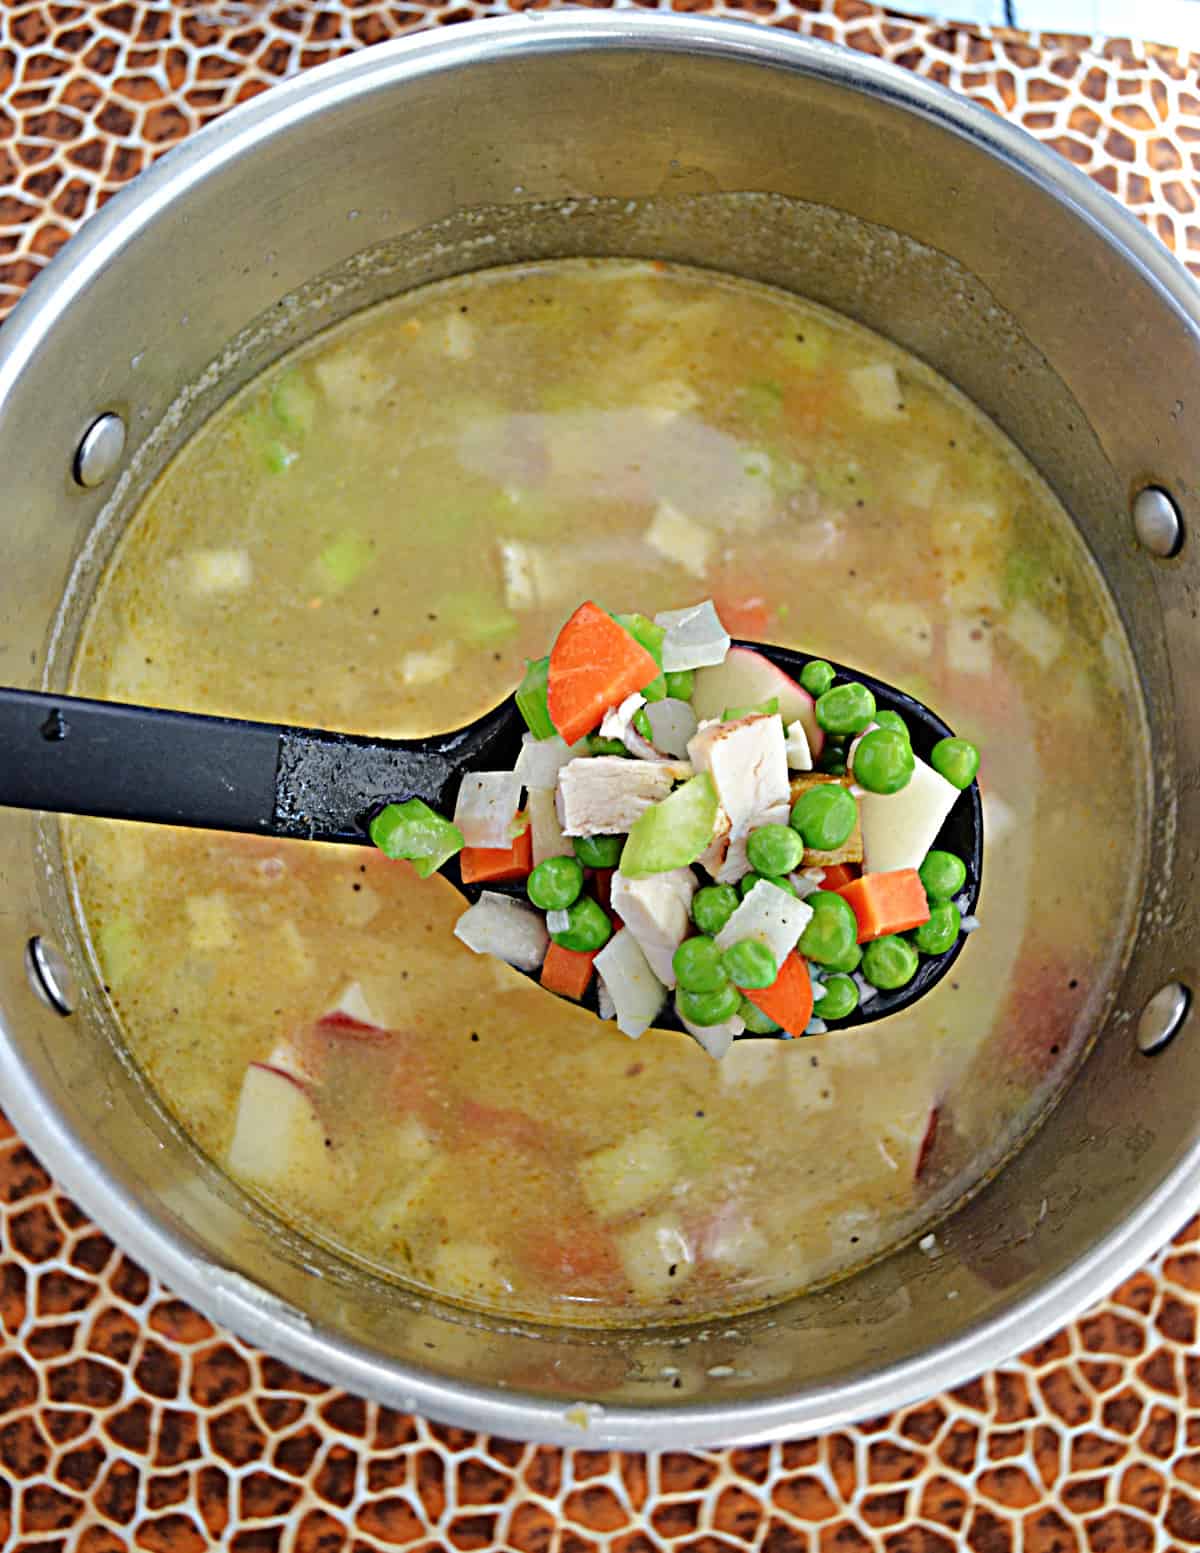 A pot of soup with a spoon holding up a scoop of the vegetables from the soup.